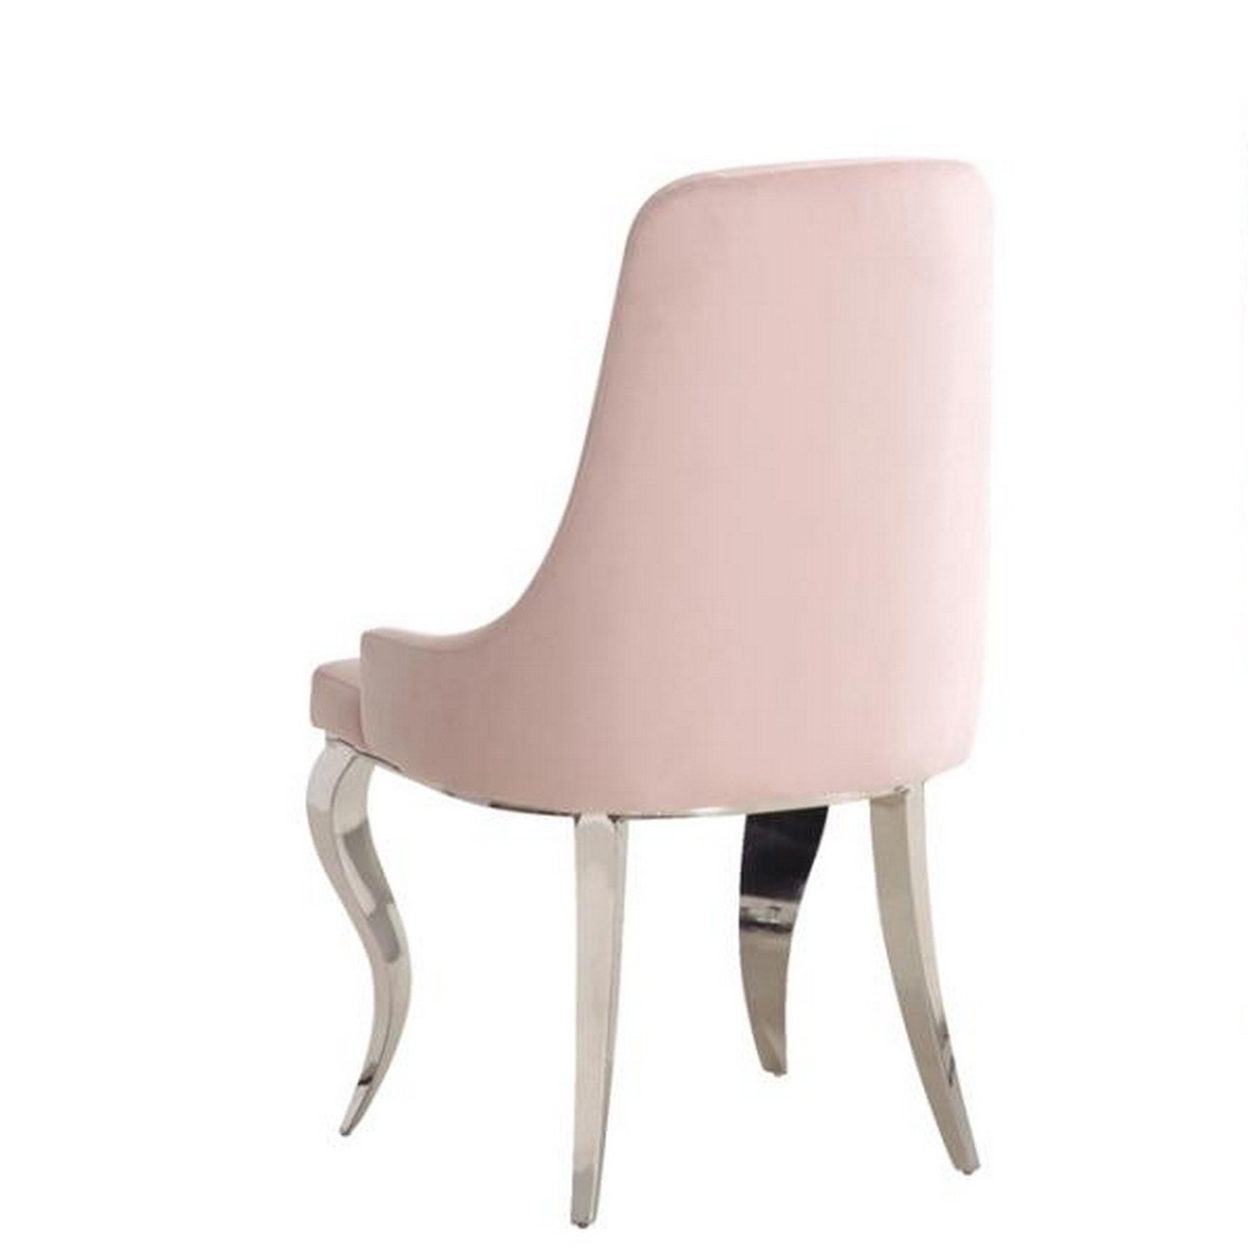 Dining Chair With Fabric Seat And Metal Legs, Set Of 2, Pink- Saltoro Sherpi